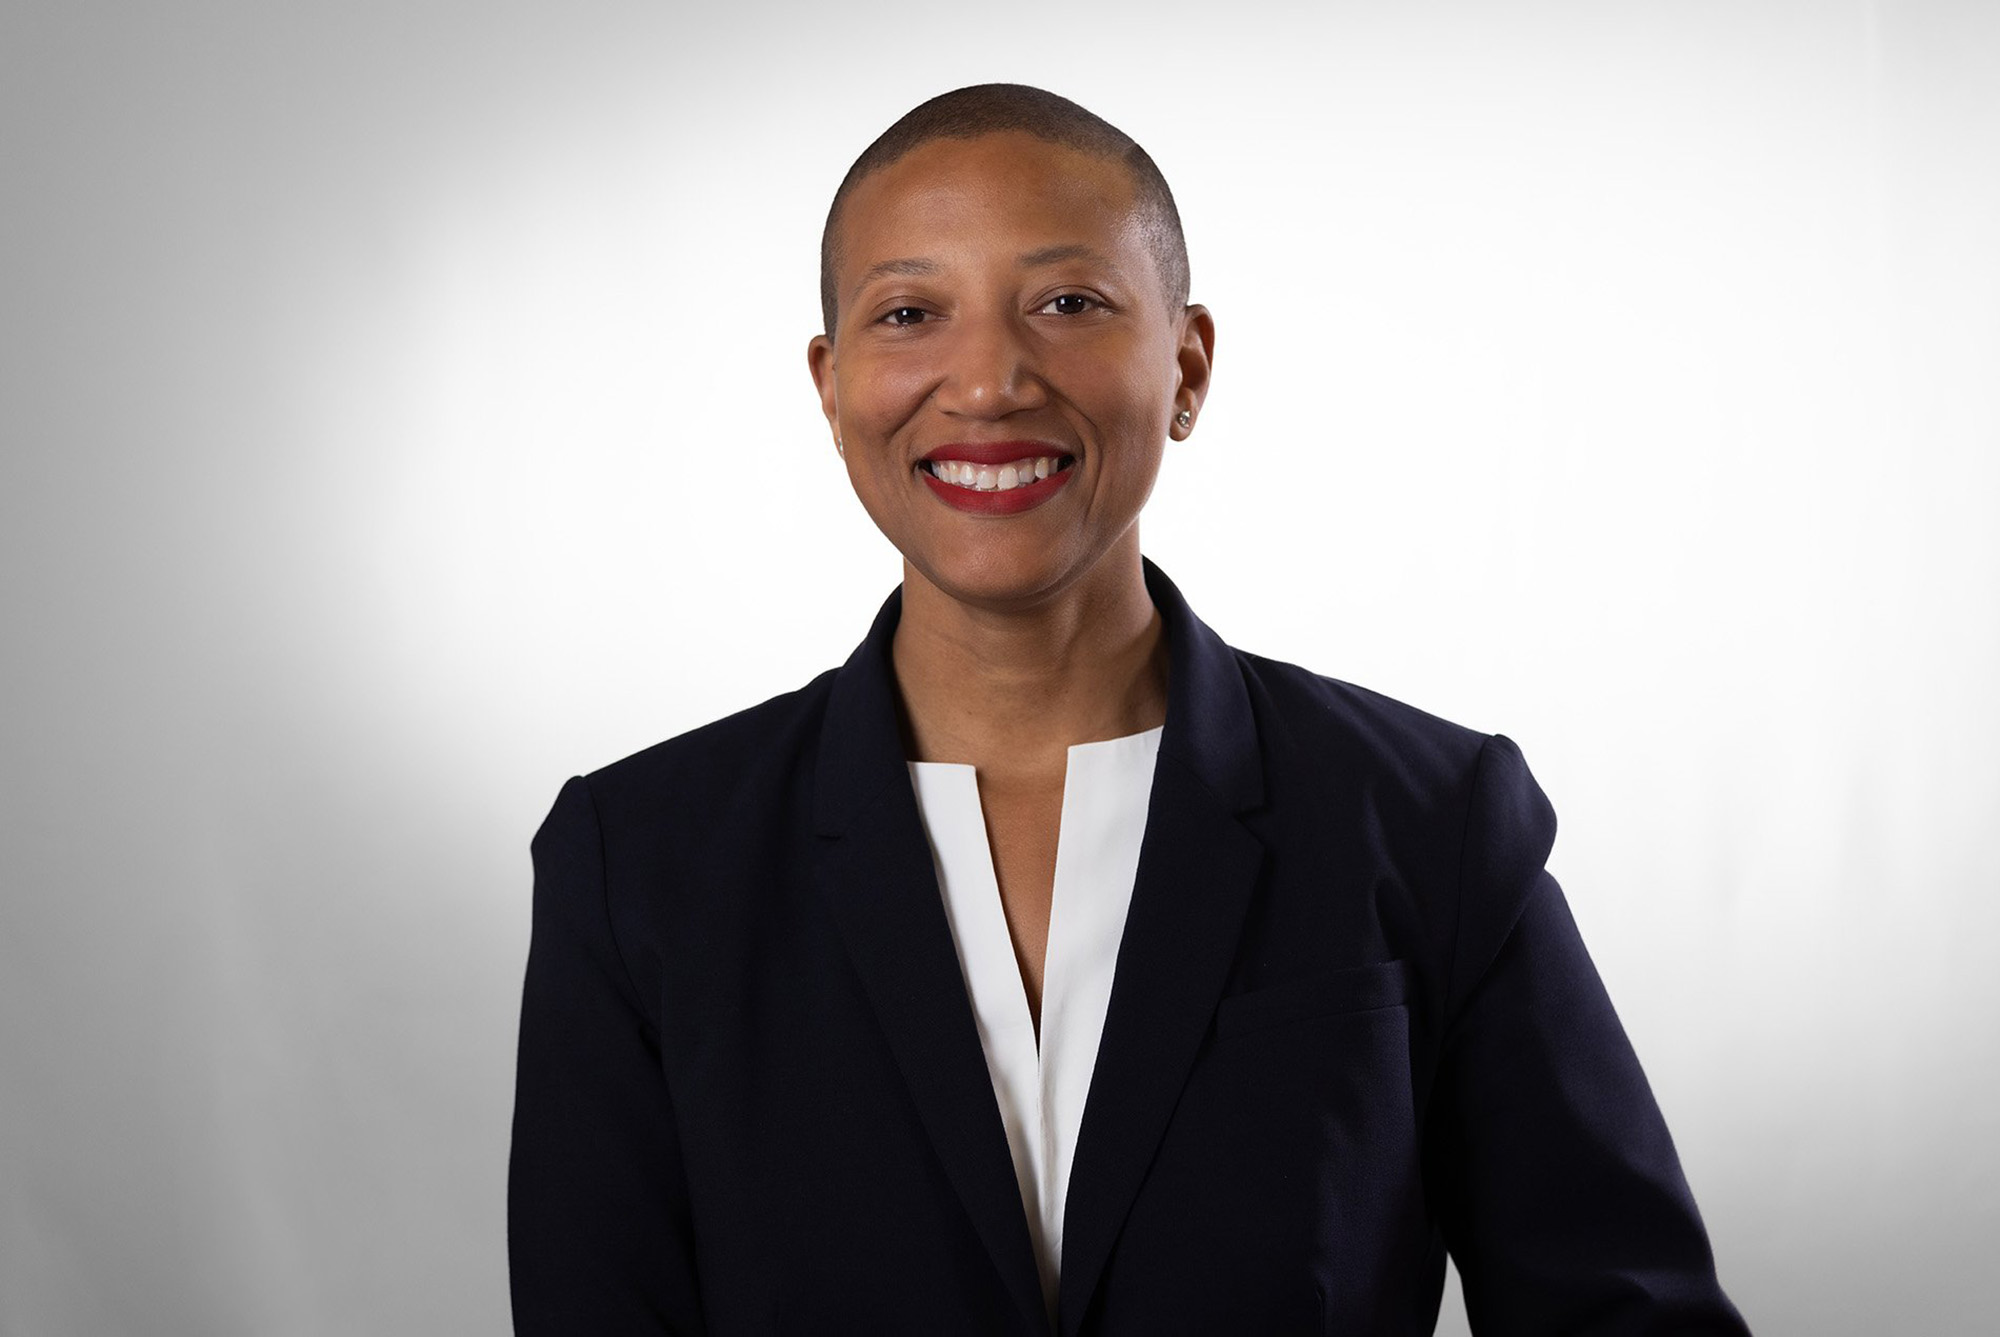 40 Under 40 Class of 2023 winner Kimberly Dowdell inaugurated as AIA